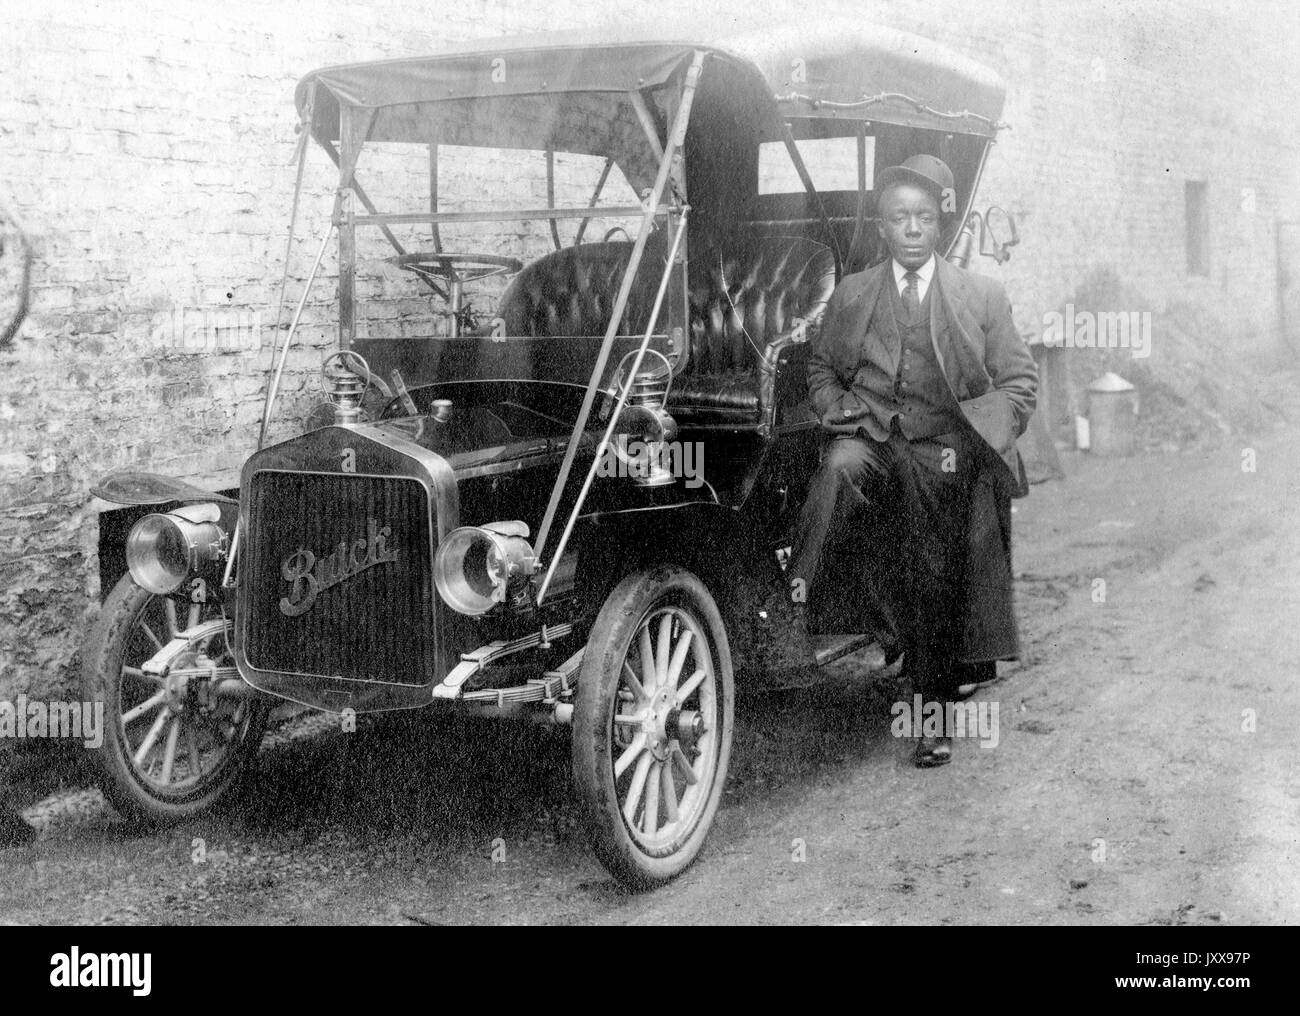 Full length shot of African American man leaning against a Buick car parked against a building, wearing a suit and hat tilted on his head, neutral facial expression, 1920. Stock Photo